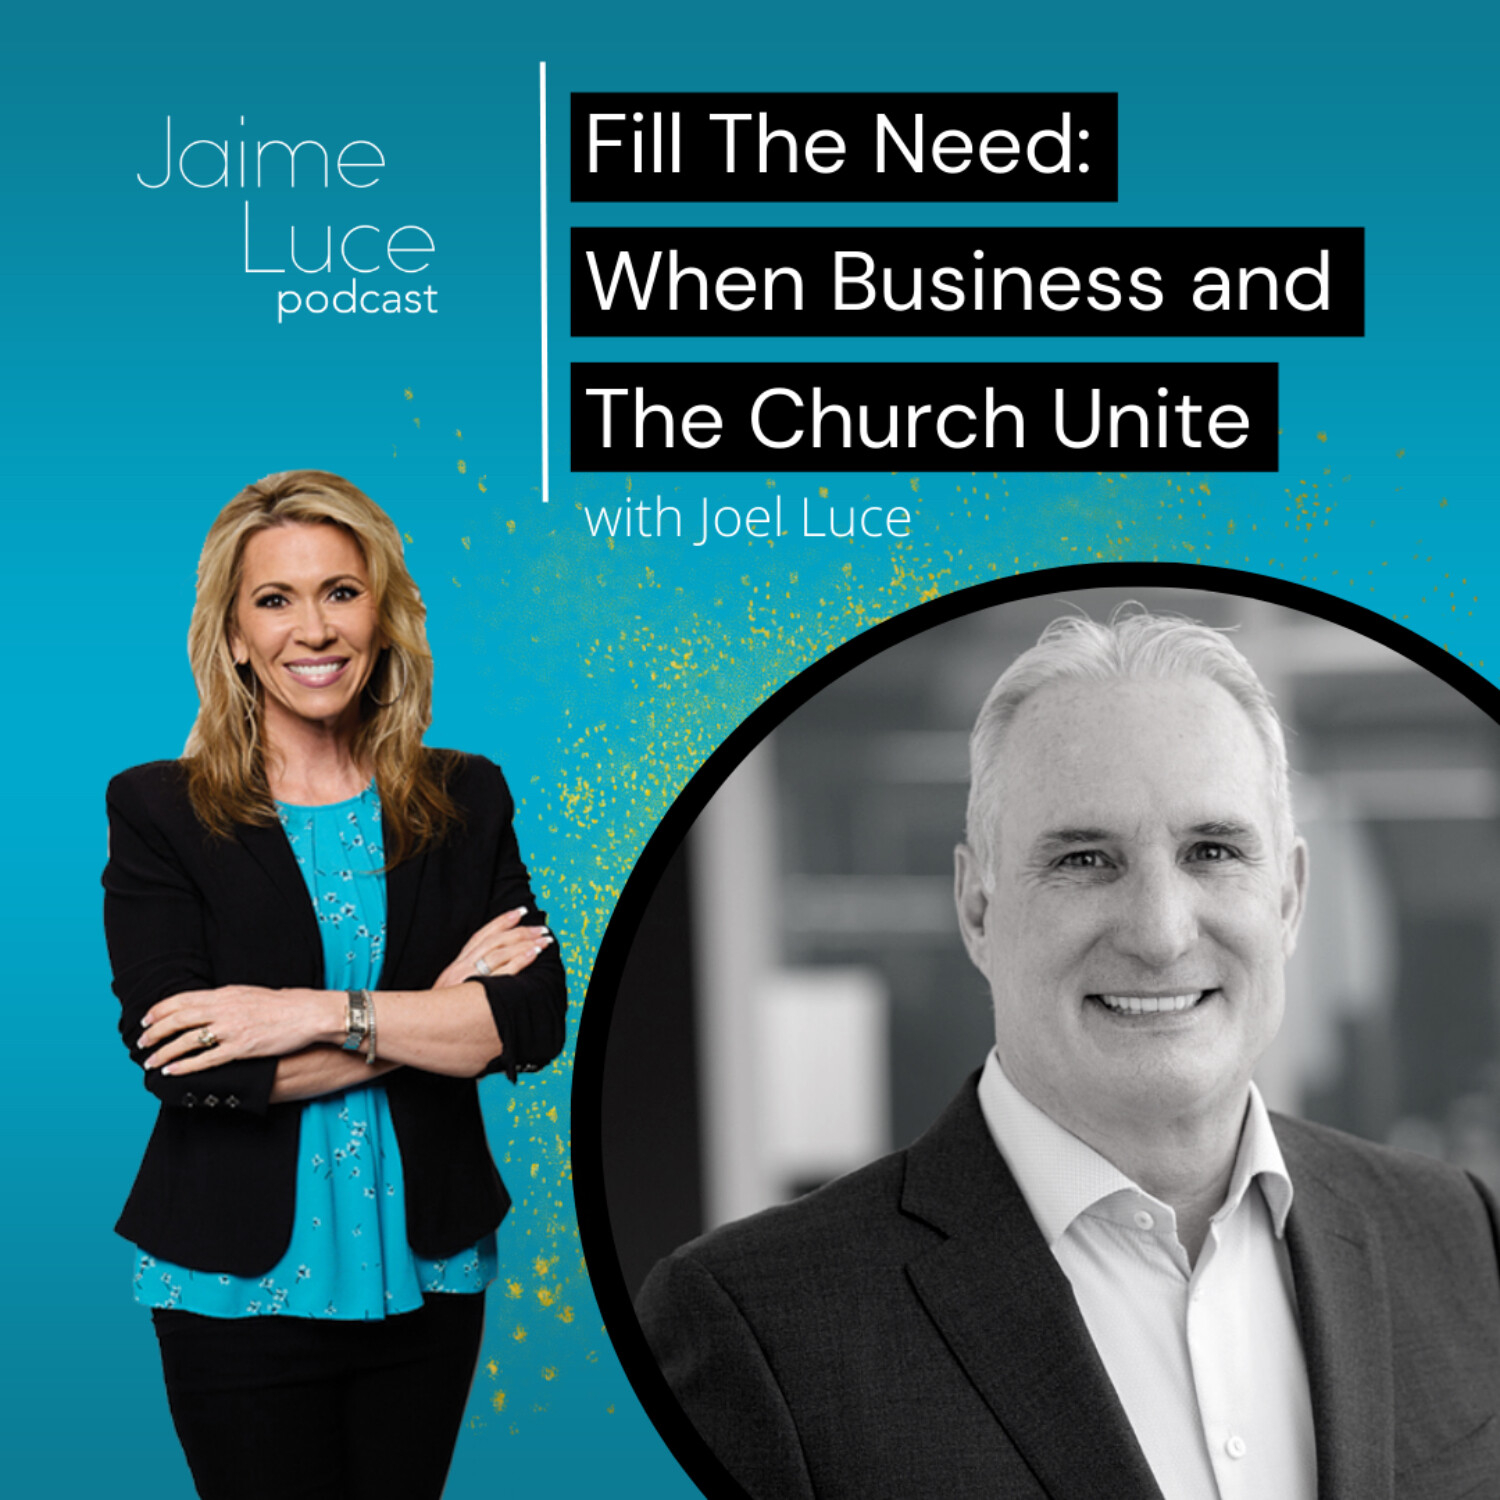 Fill The Need: When Business and The Church Unite with Joel Luce